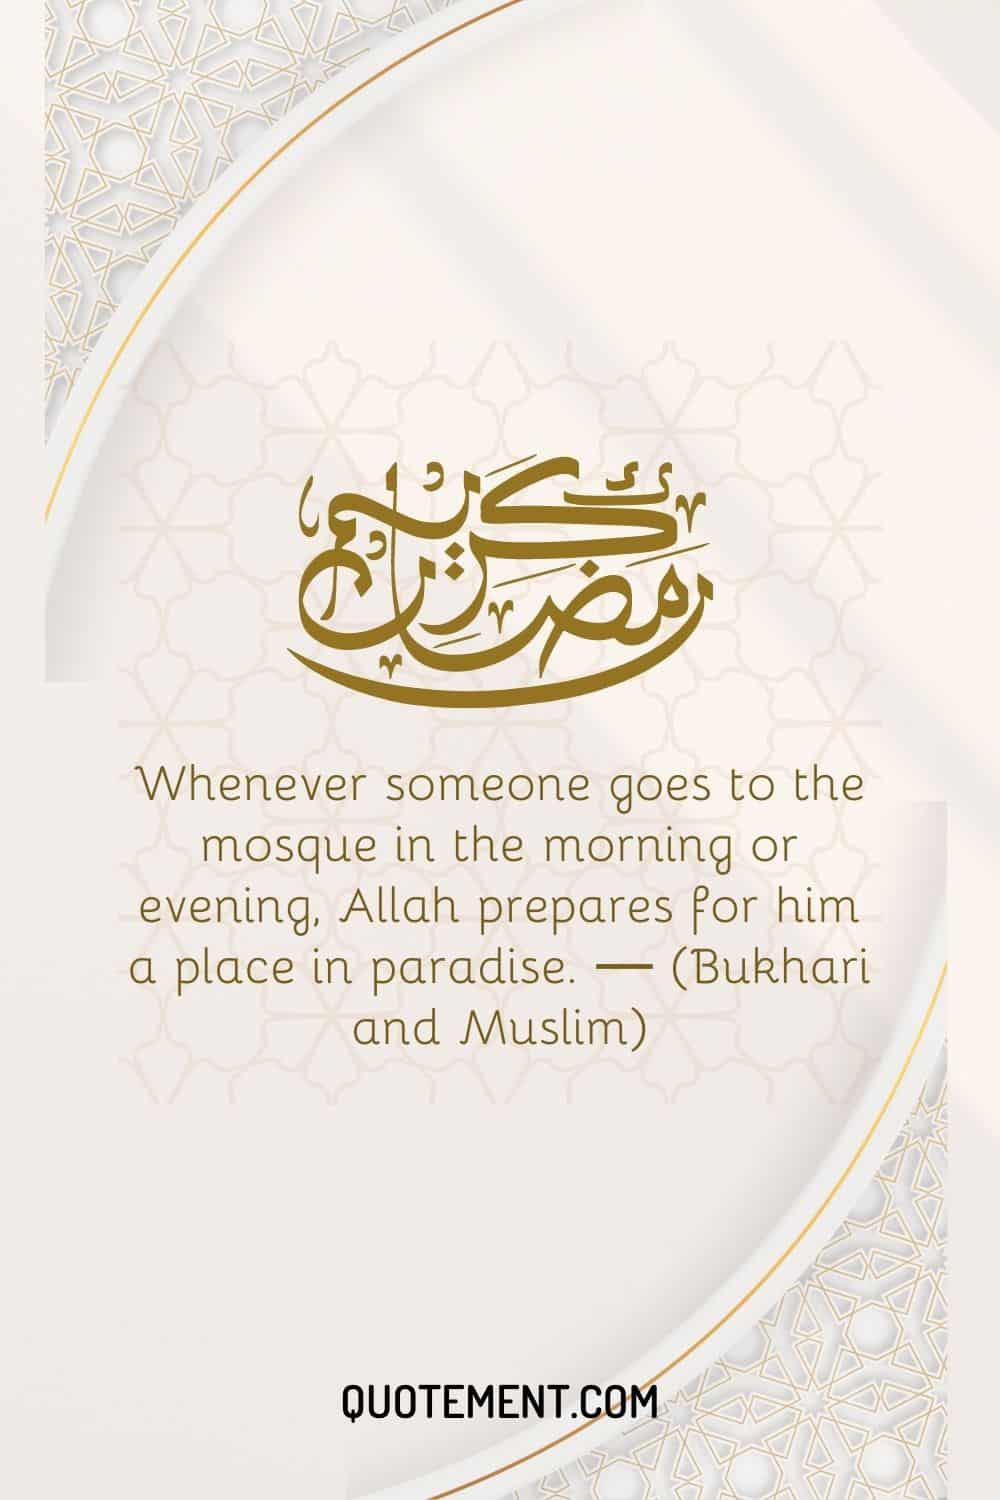 Whenever someone goes to the mosque in the morning or evening, Allah prepares for him a place in paradise (2)